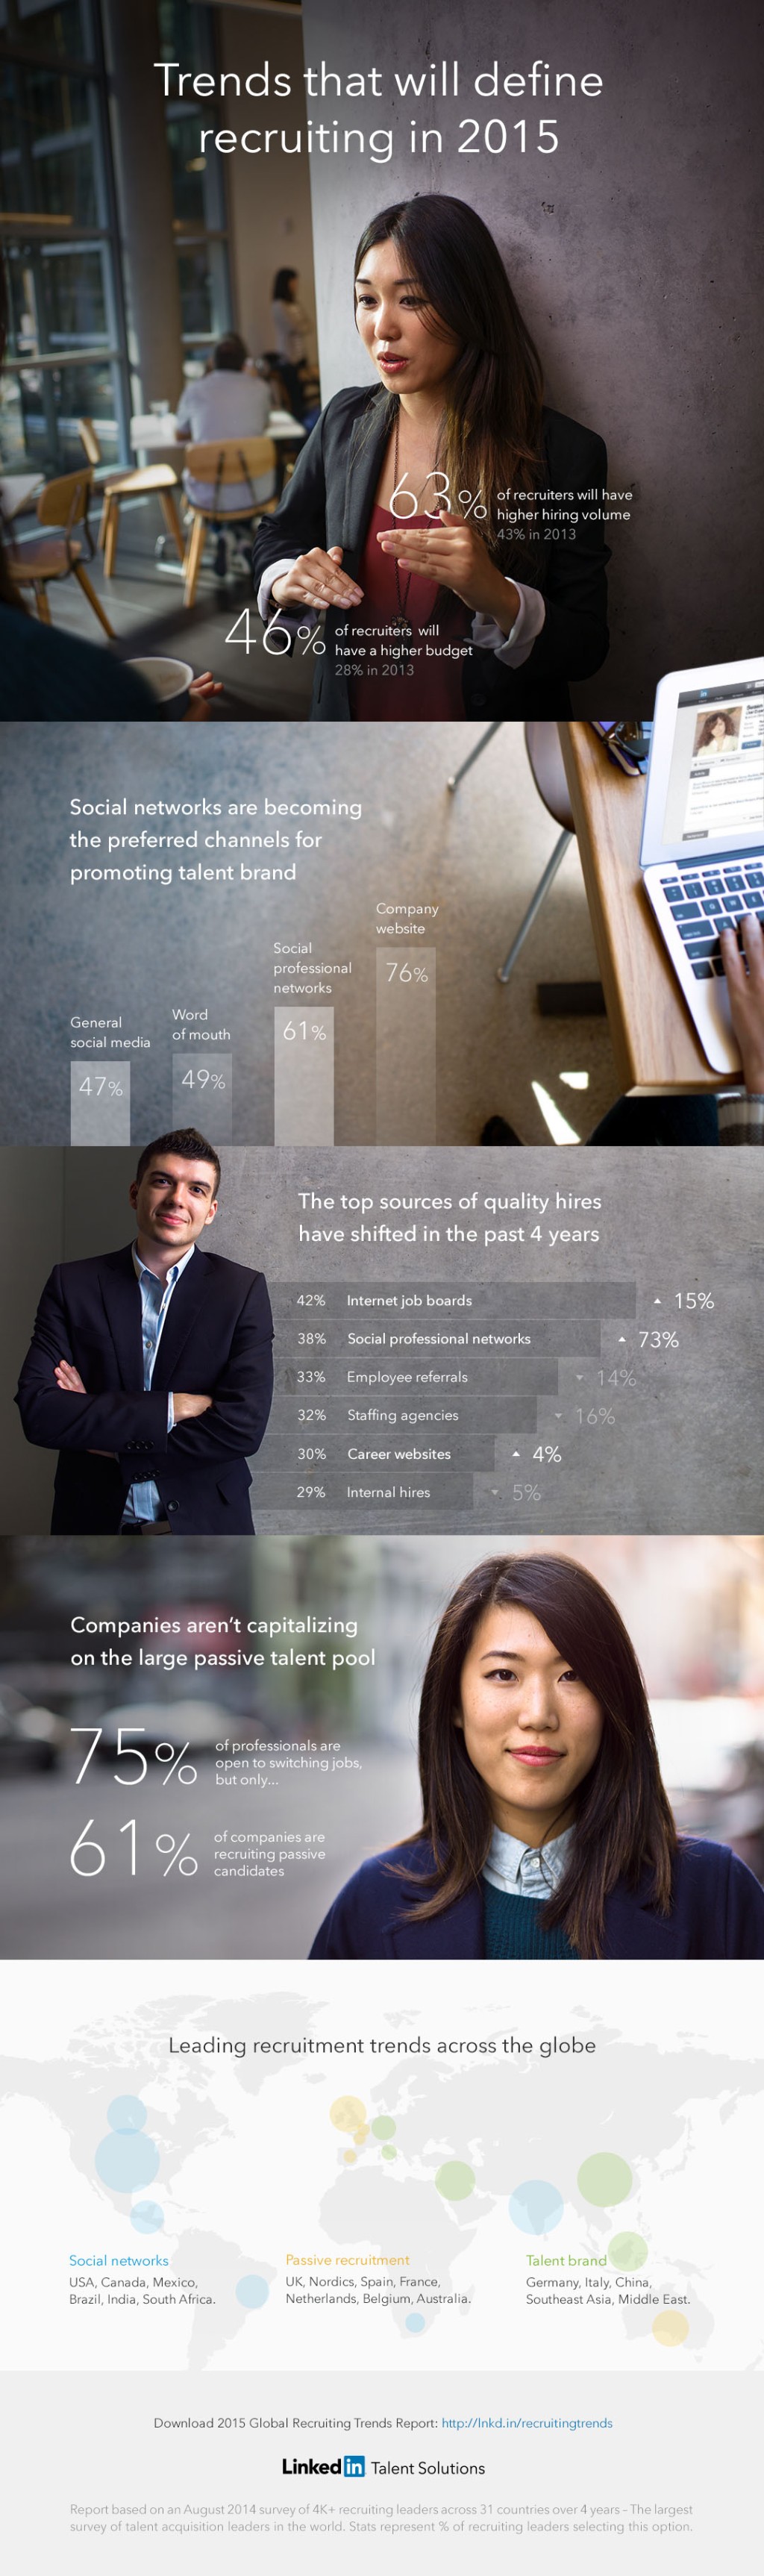 global recruiting trends 2015 infographic